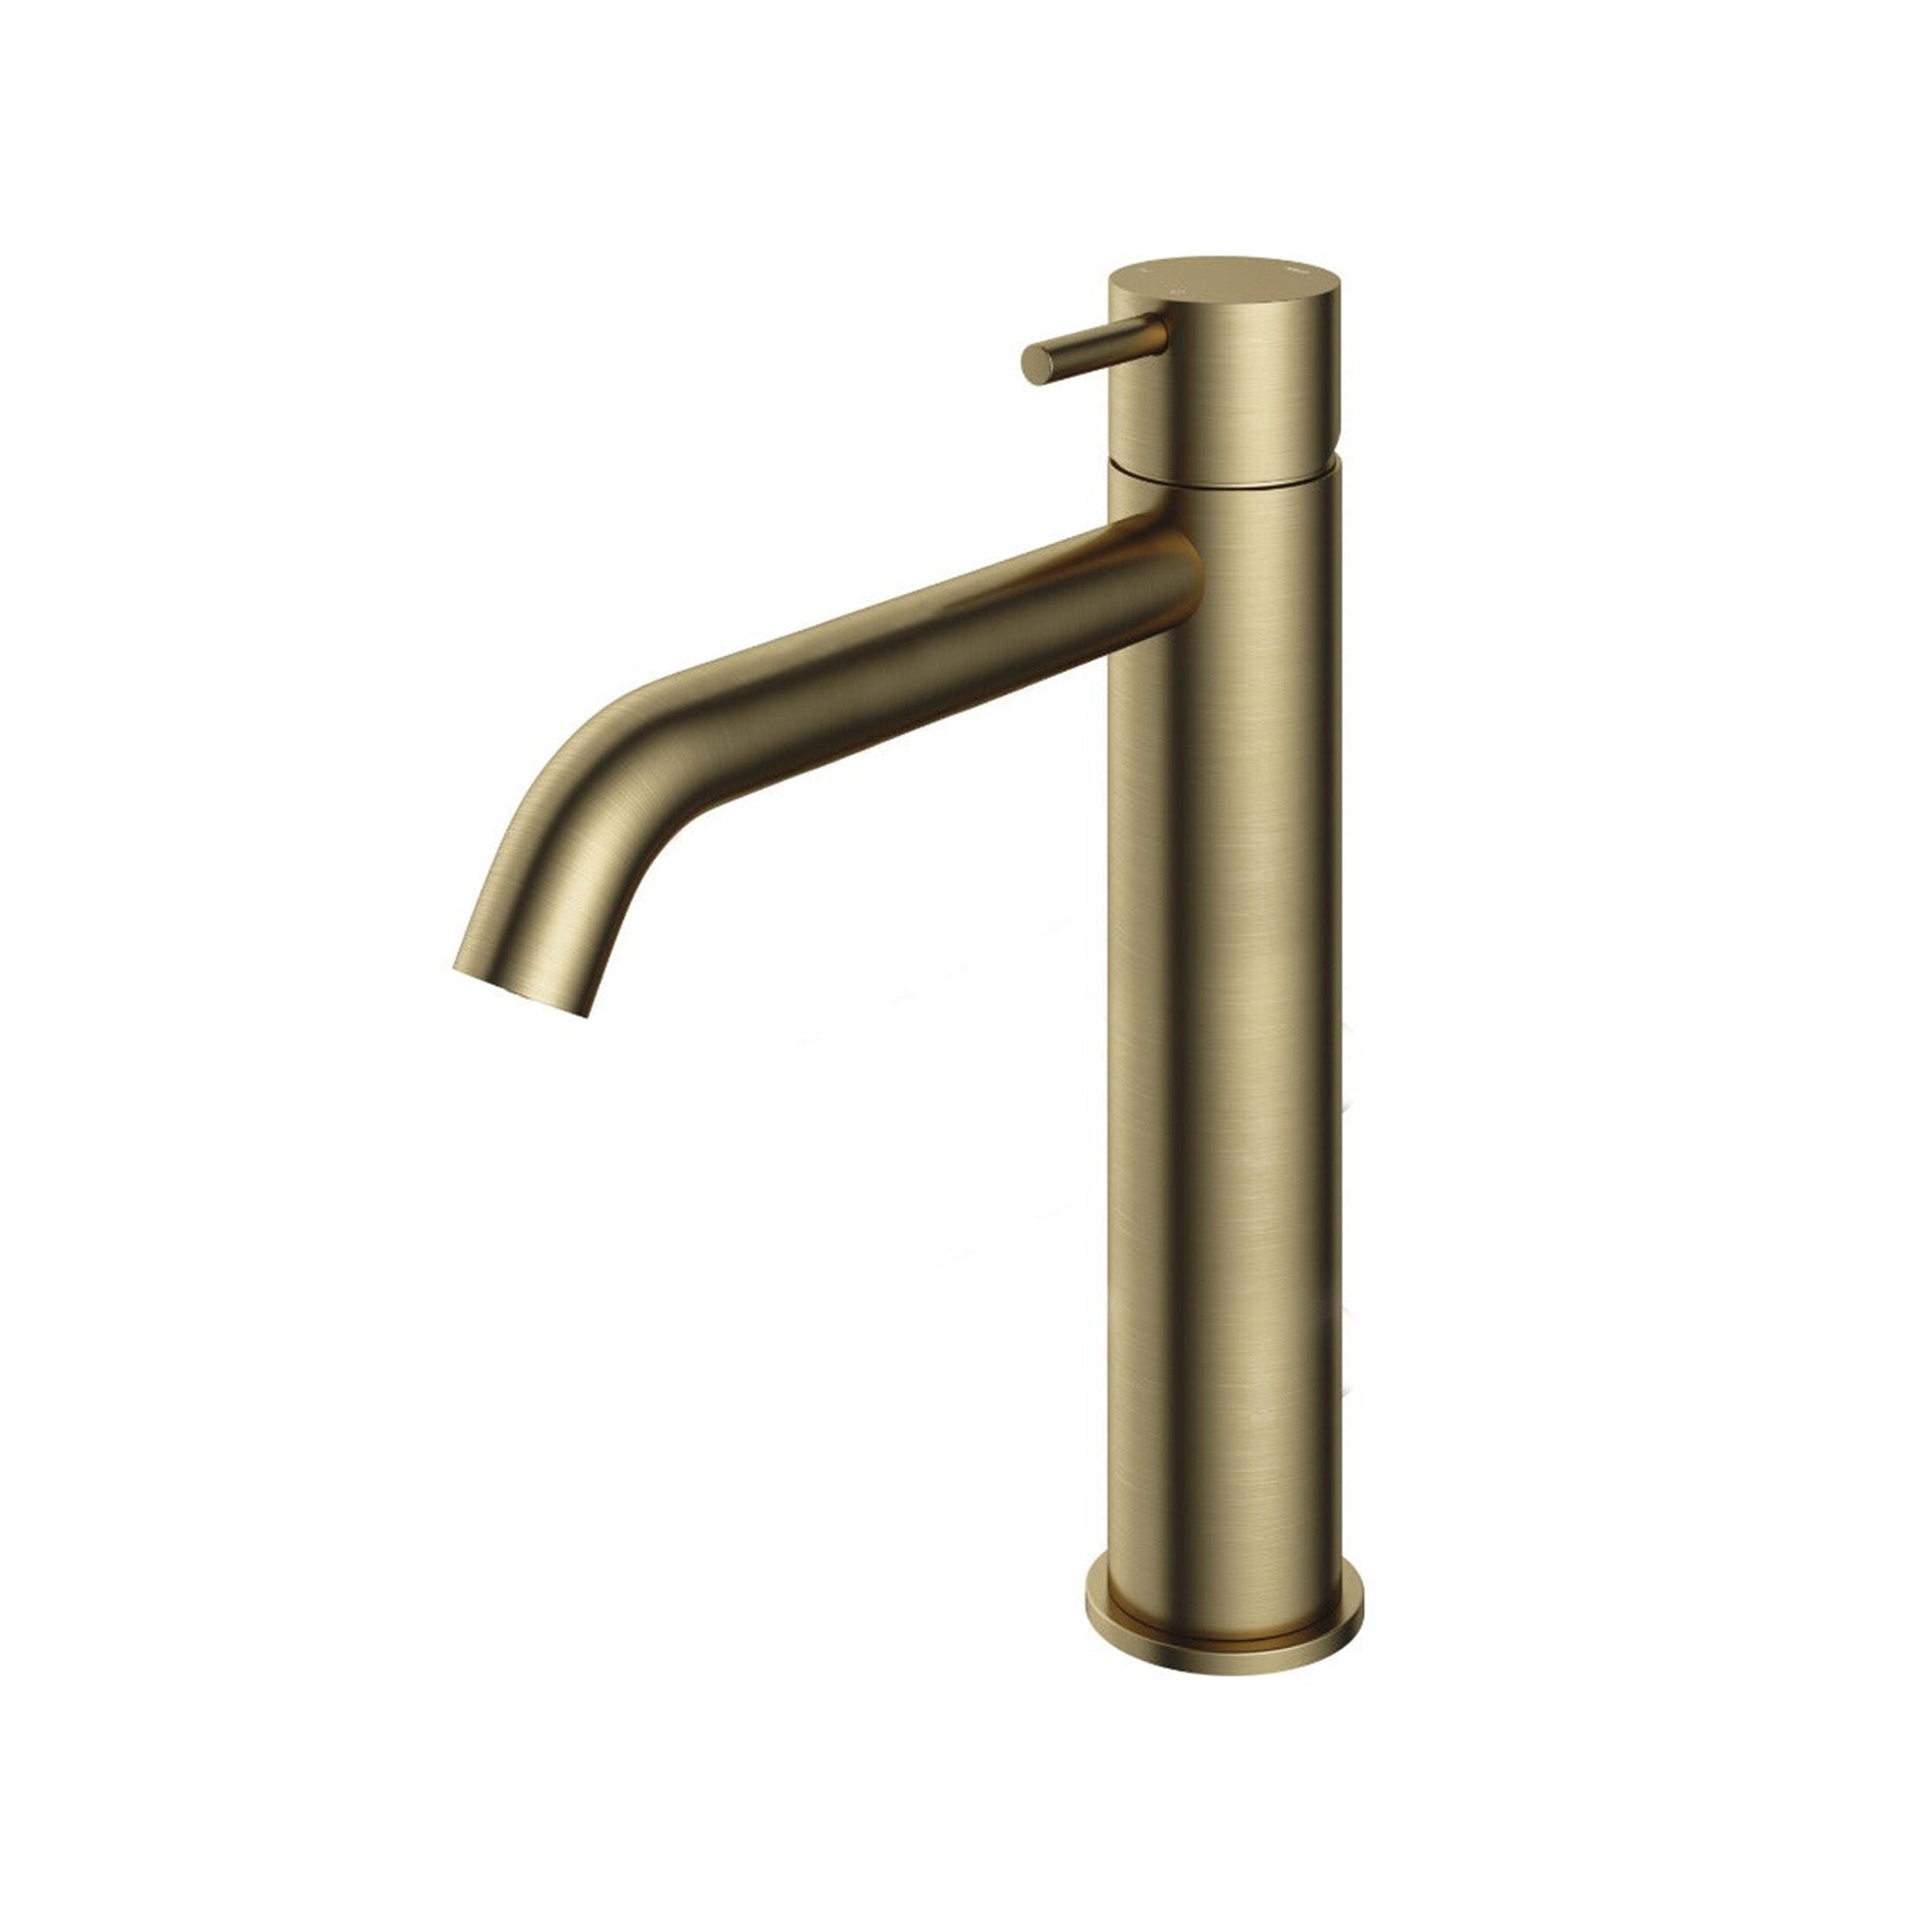 cobber 286mm tall basin-mixer tap monobloc curved spout brushed brass